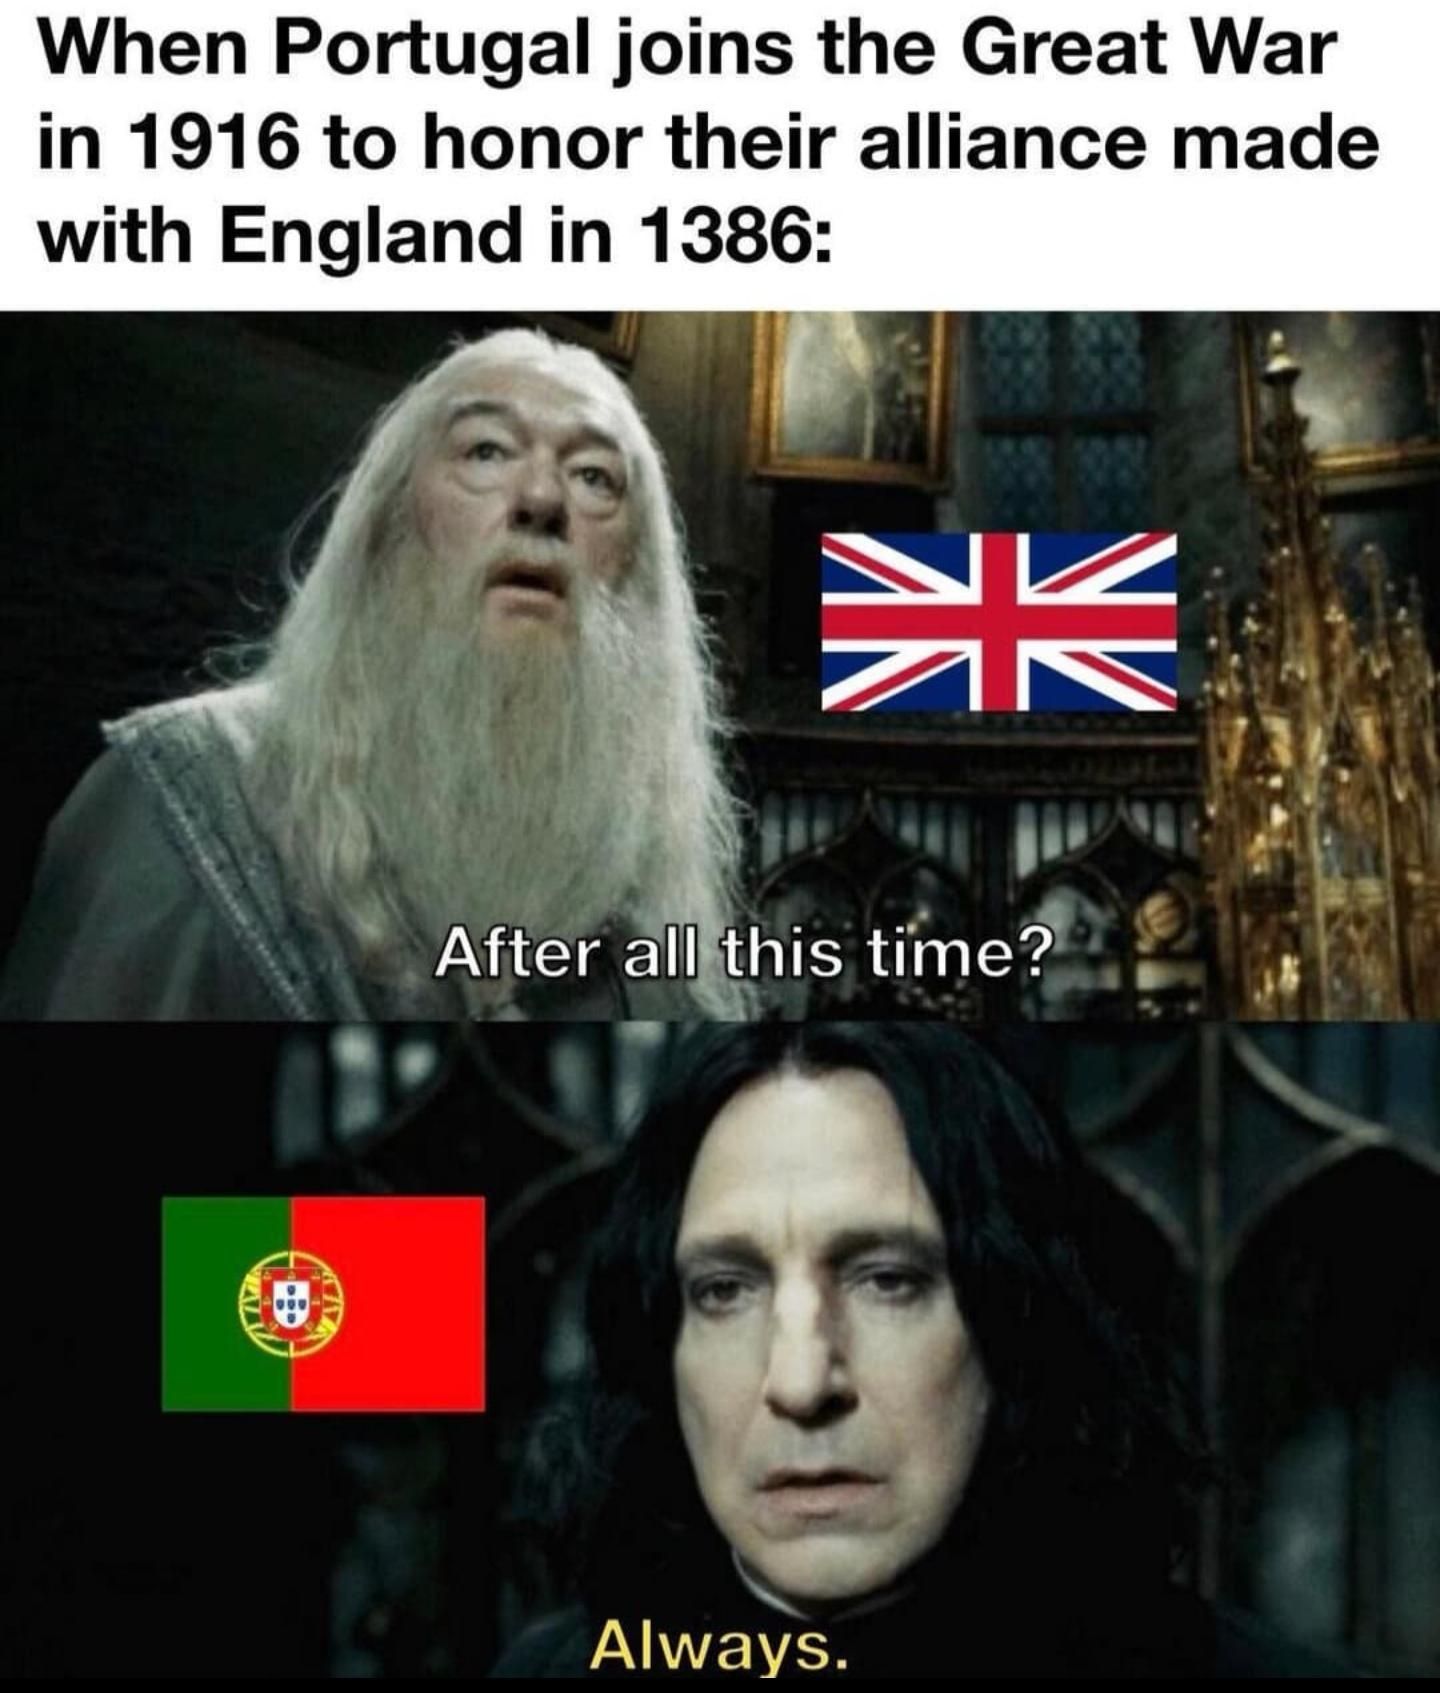 That's quite a while to remain in an alliance